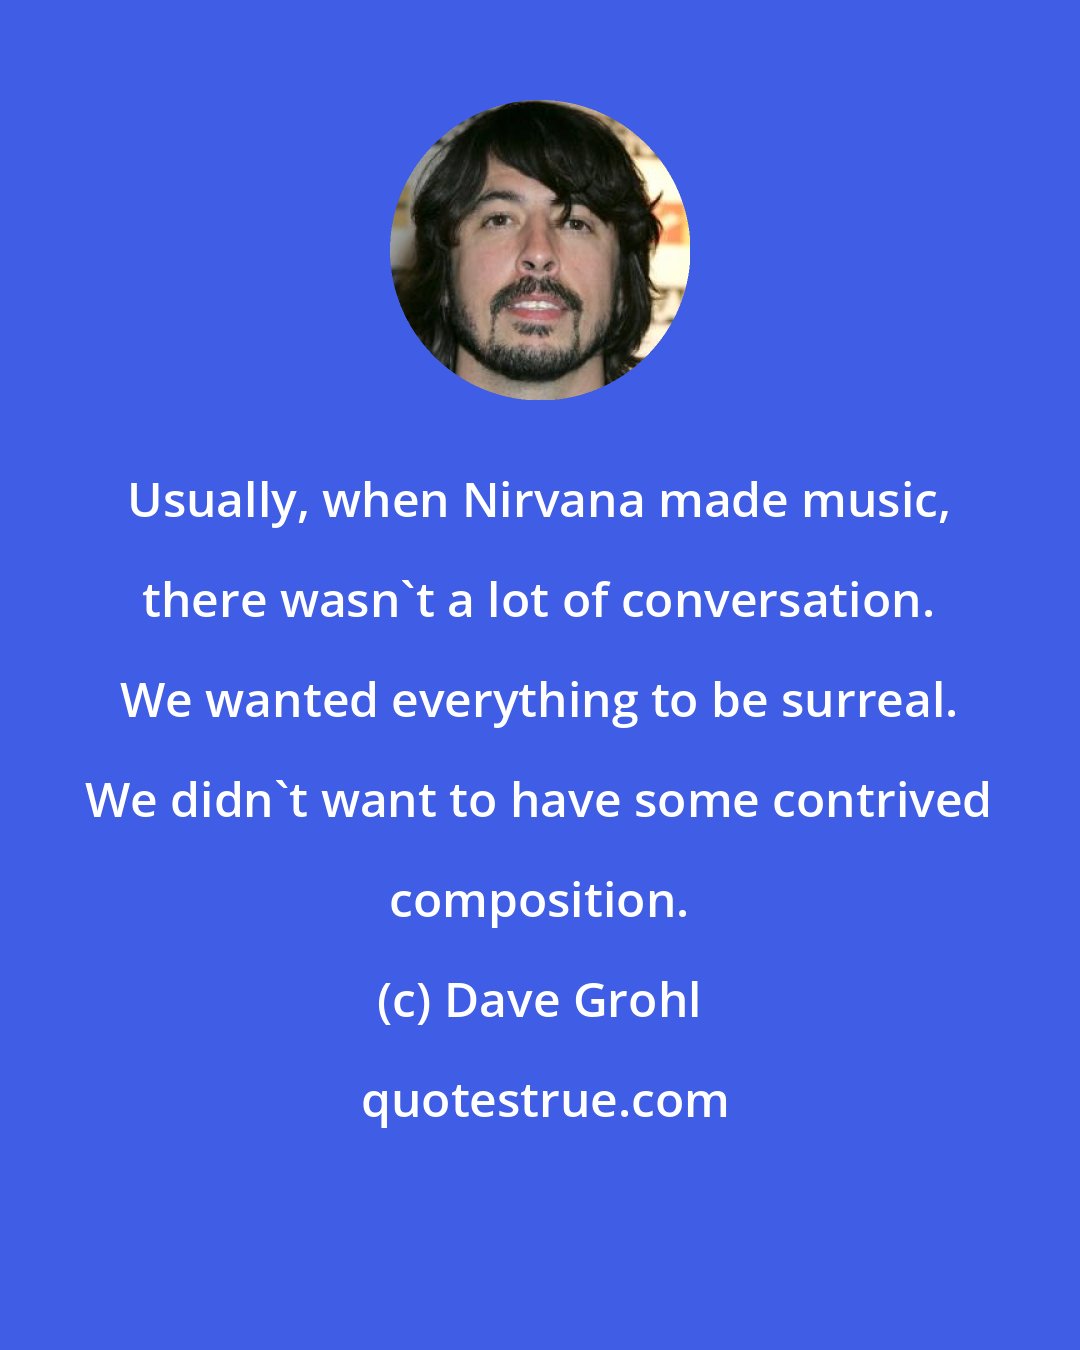 Dave Grohl: Usually, when Nirvana made music, there wasn't a lot of conversation. We wanted everything to be surreal. We didn't want to have some contrived composition.